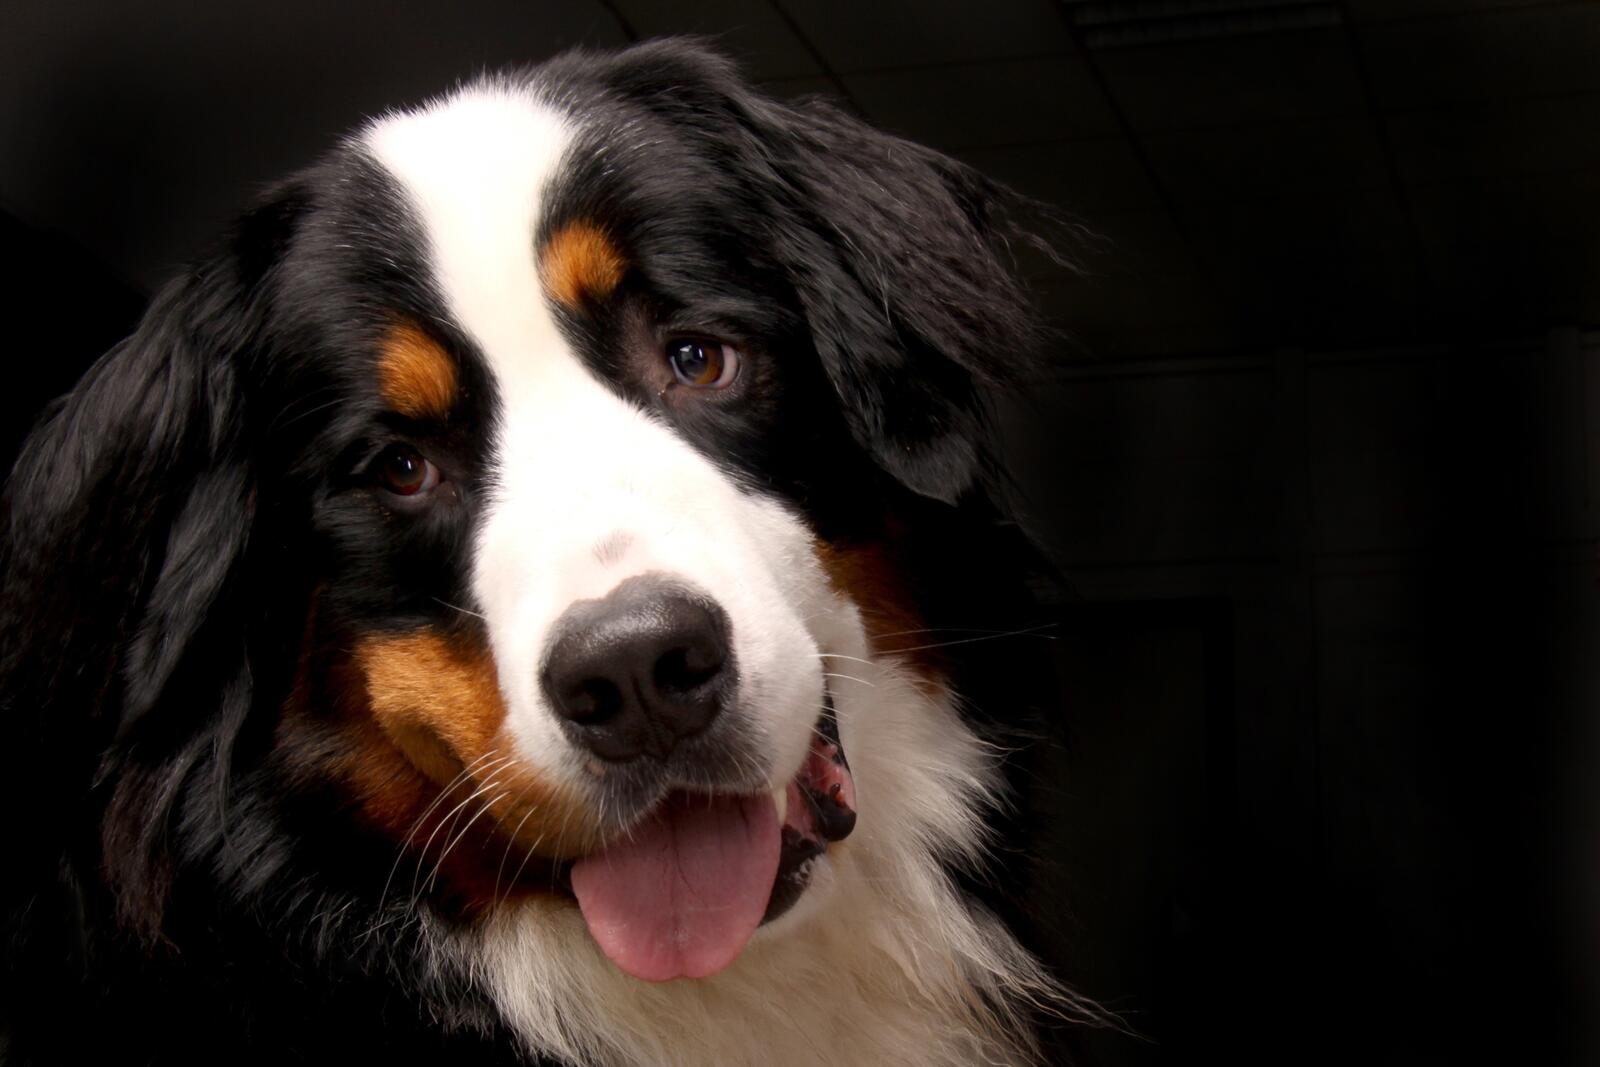 Free photo A Bernese Highlander is photographed against a blackened background